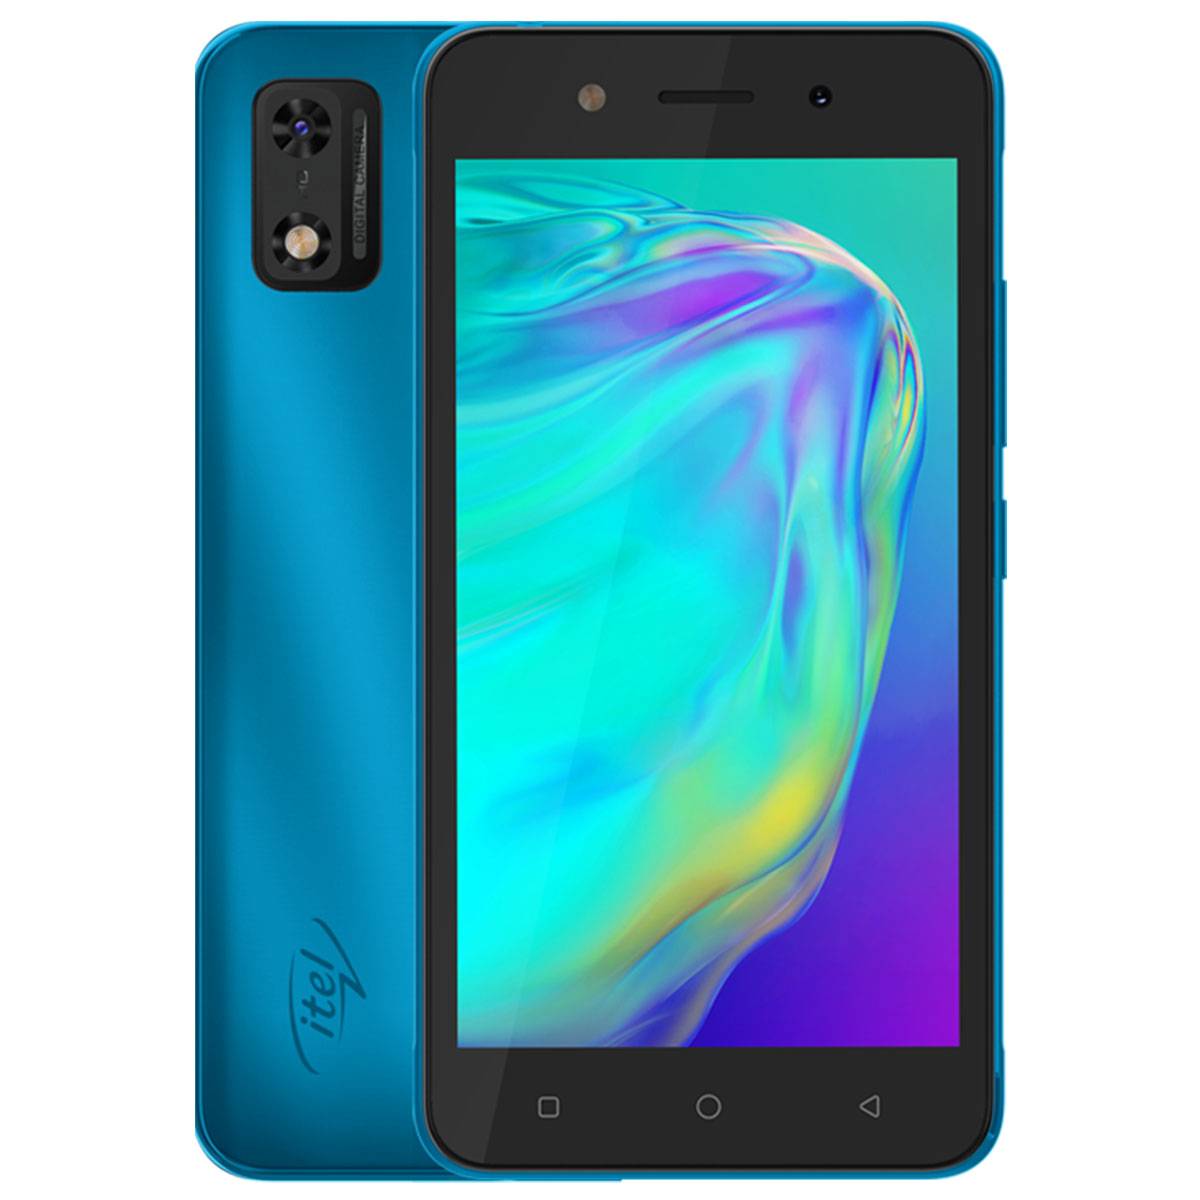 iTel A17 is now available at Mobile Master